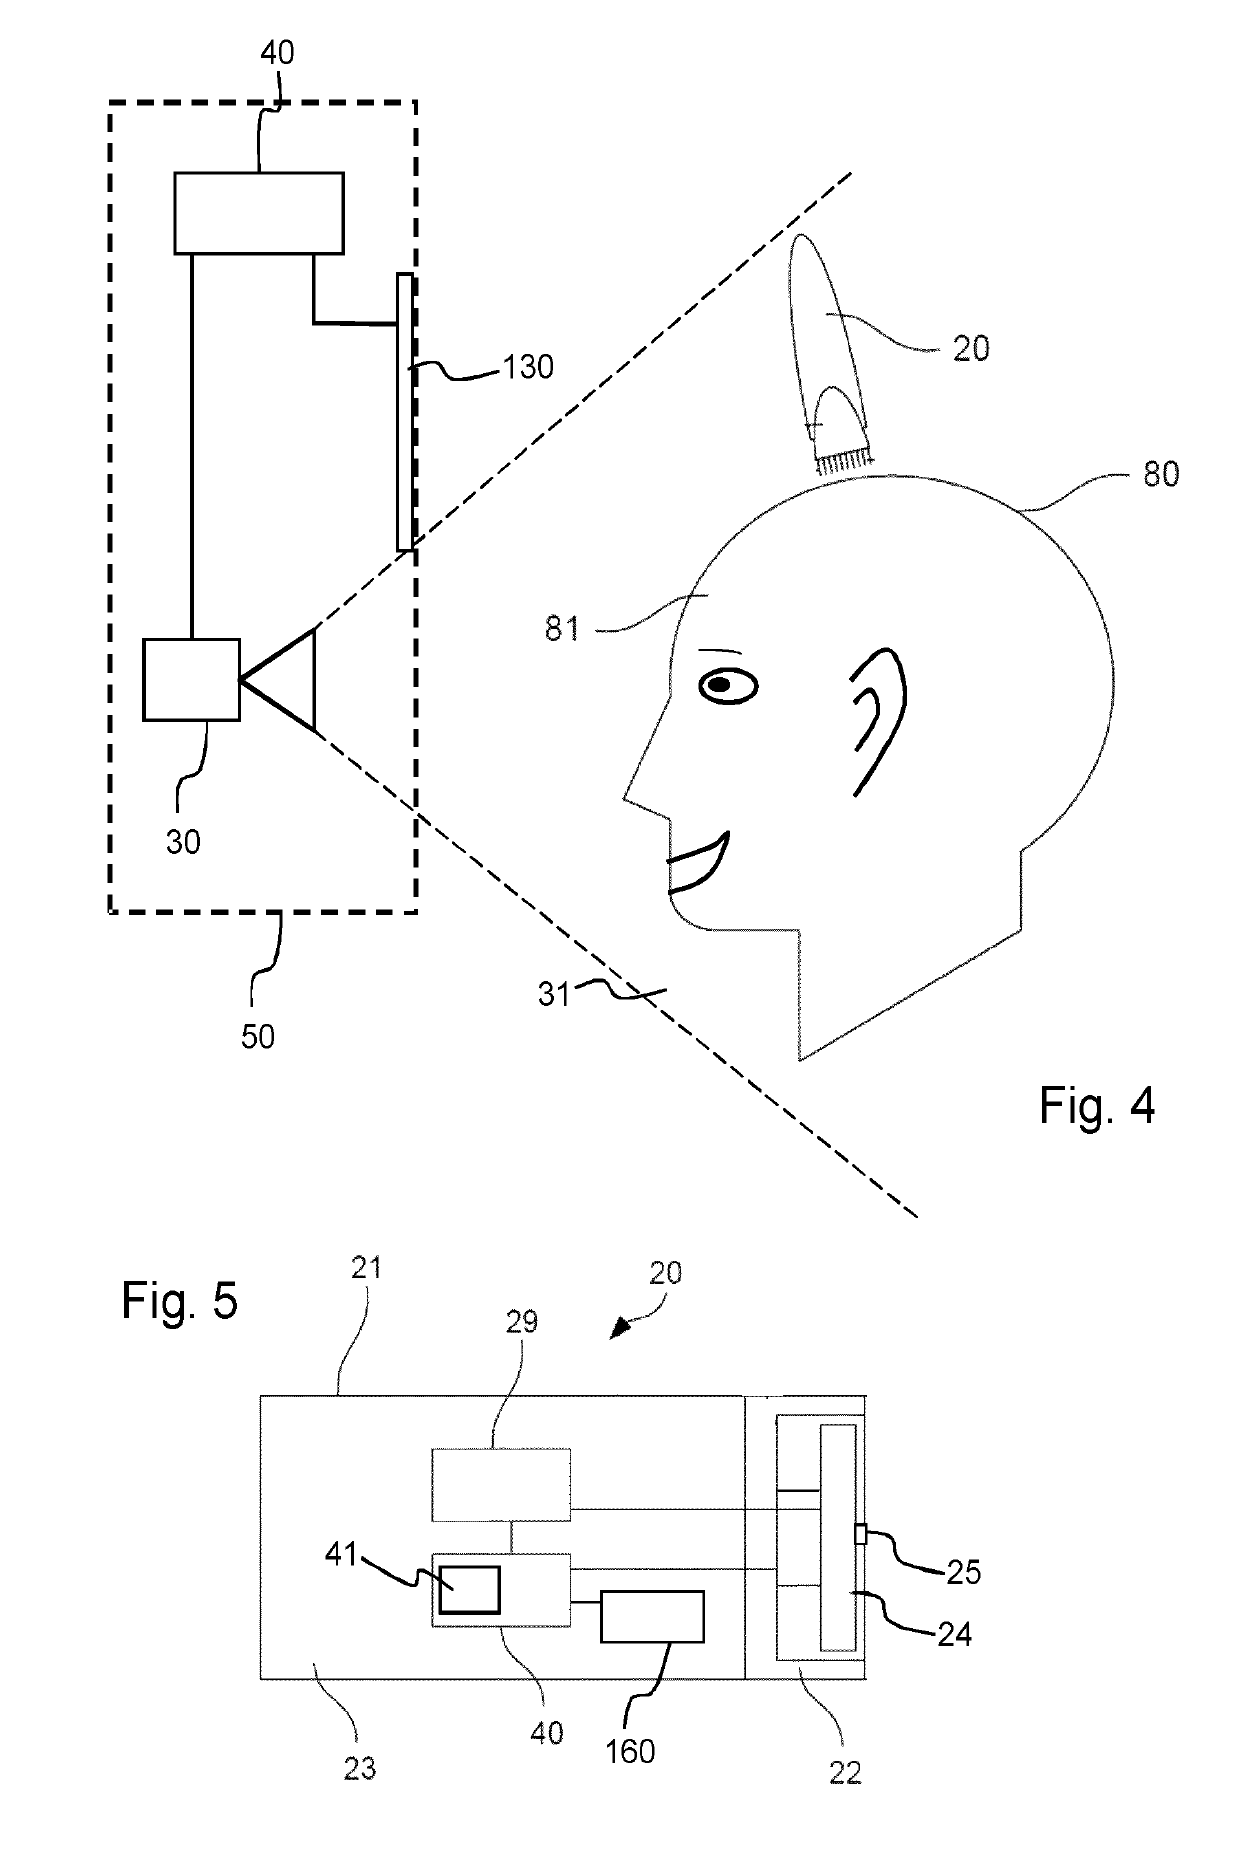 System and a method for guiding a user during a shaving procedure